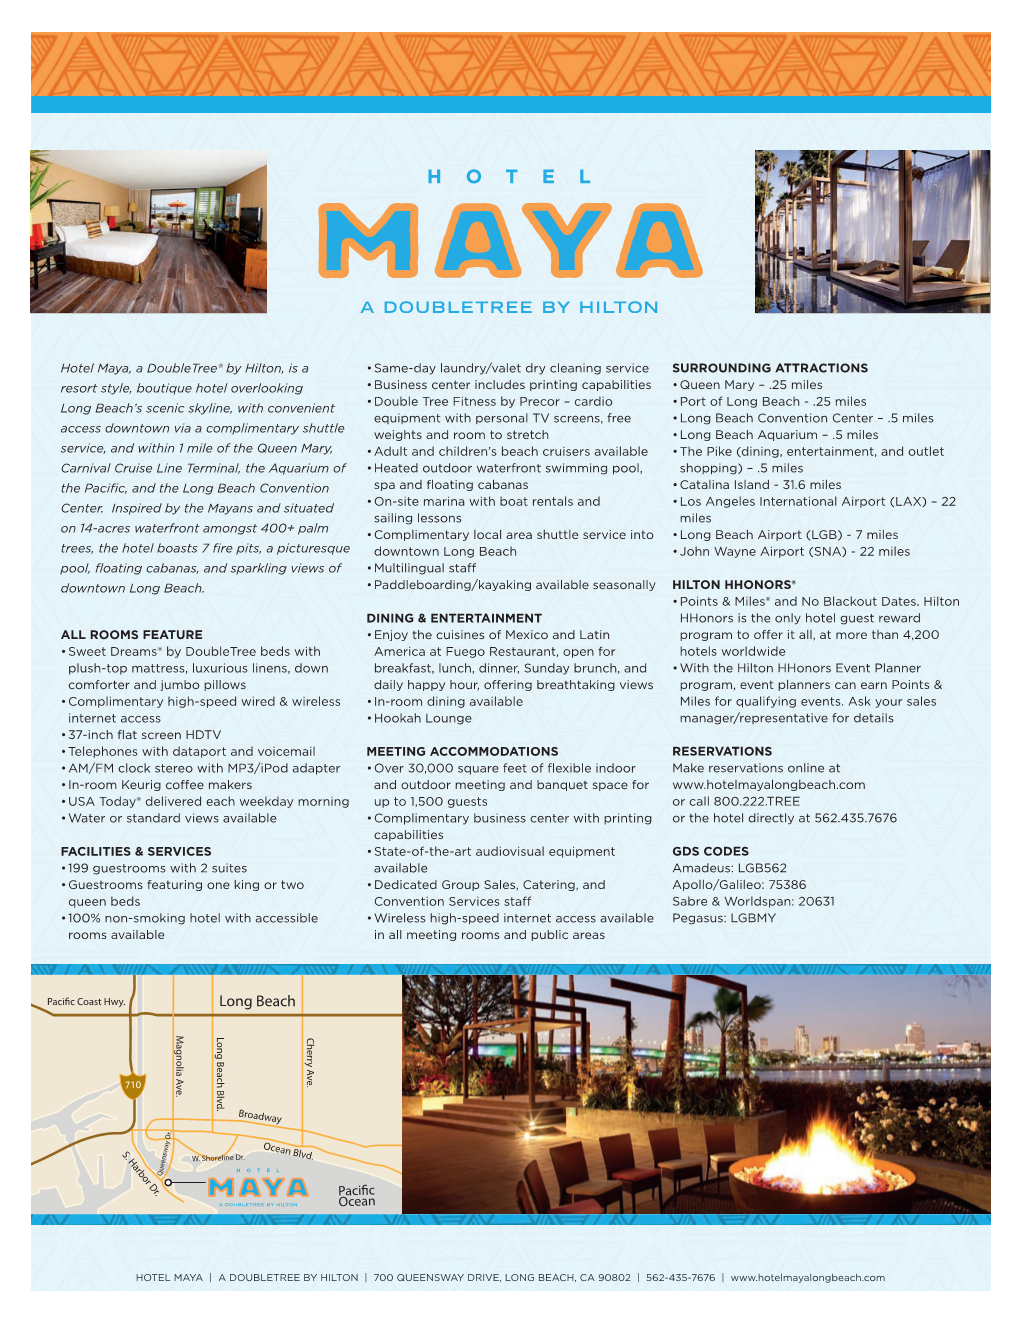 Hotel Maya, a Doubletree® by Hilton, Is a Resort Style, Boutique Hotel Overlooking Long Beach's Scenic Skyline, with Convenie